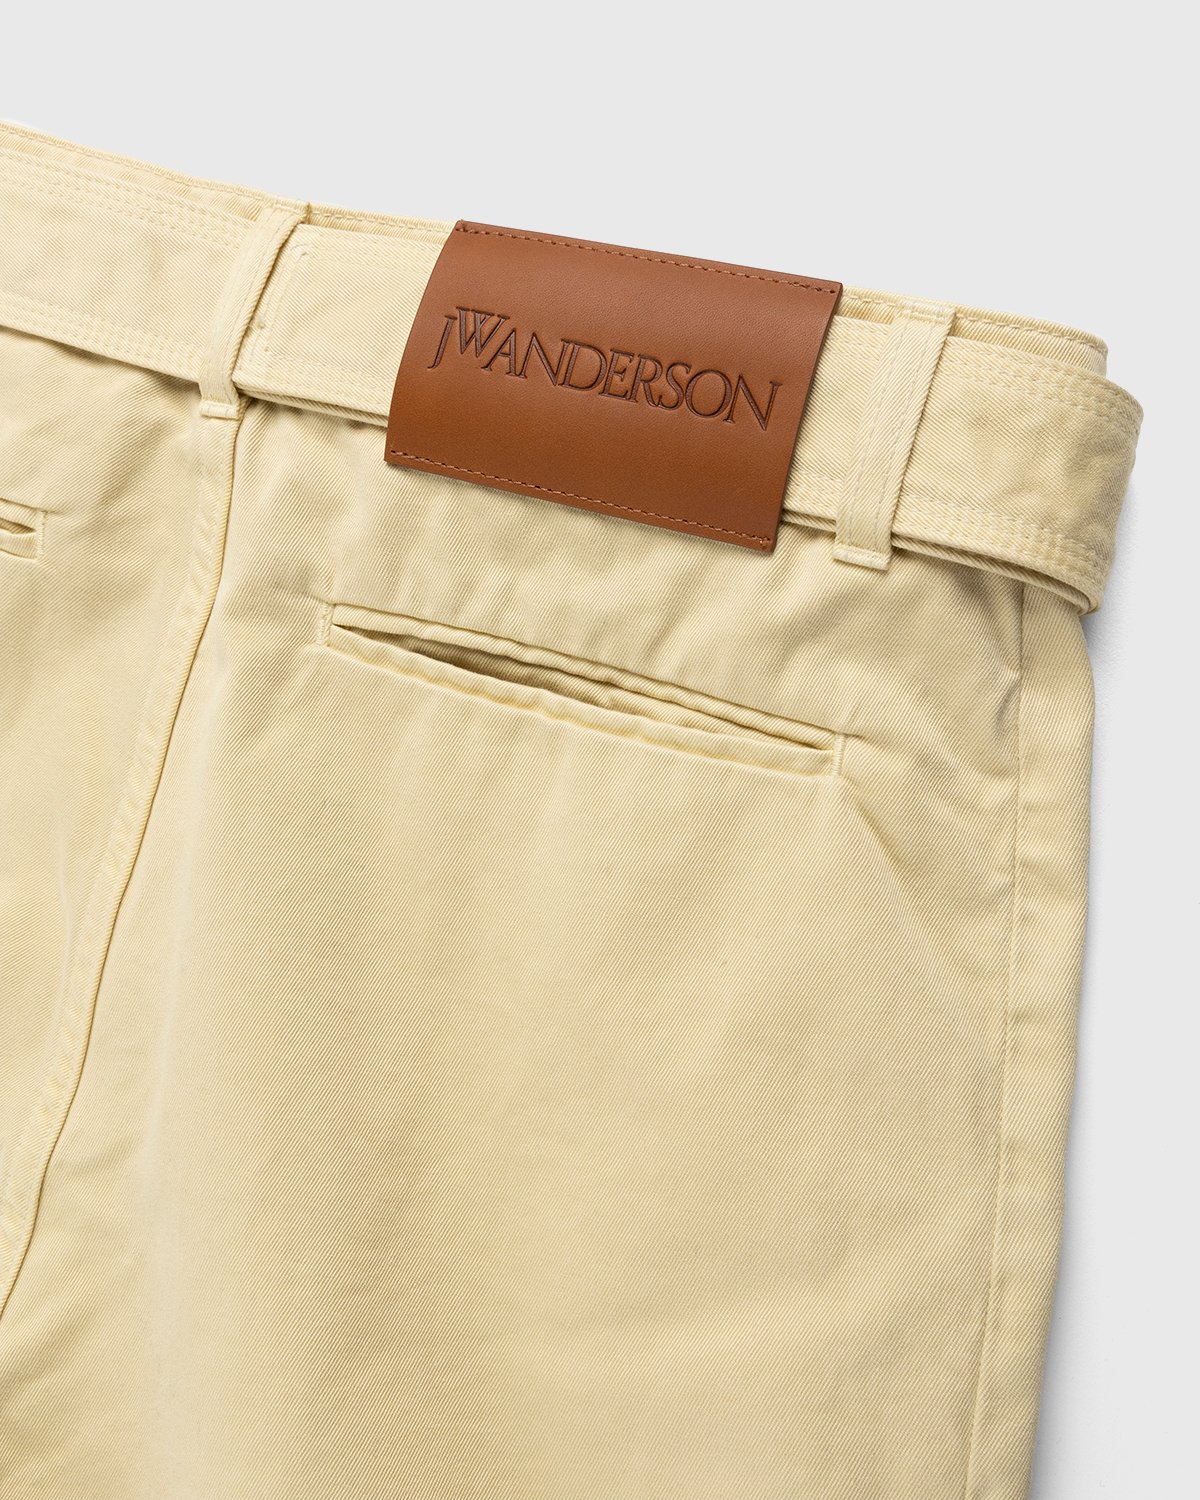 J.W. Anderson - Strawberry Chino Shorts Natural/Red - Clothing - Beige - Image 3